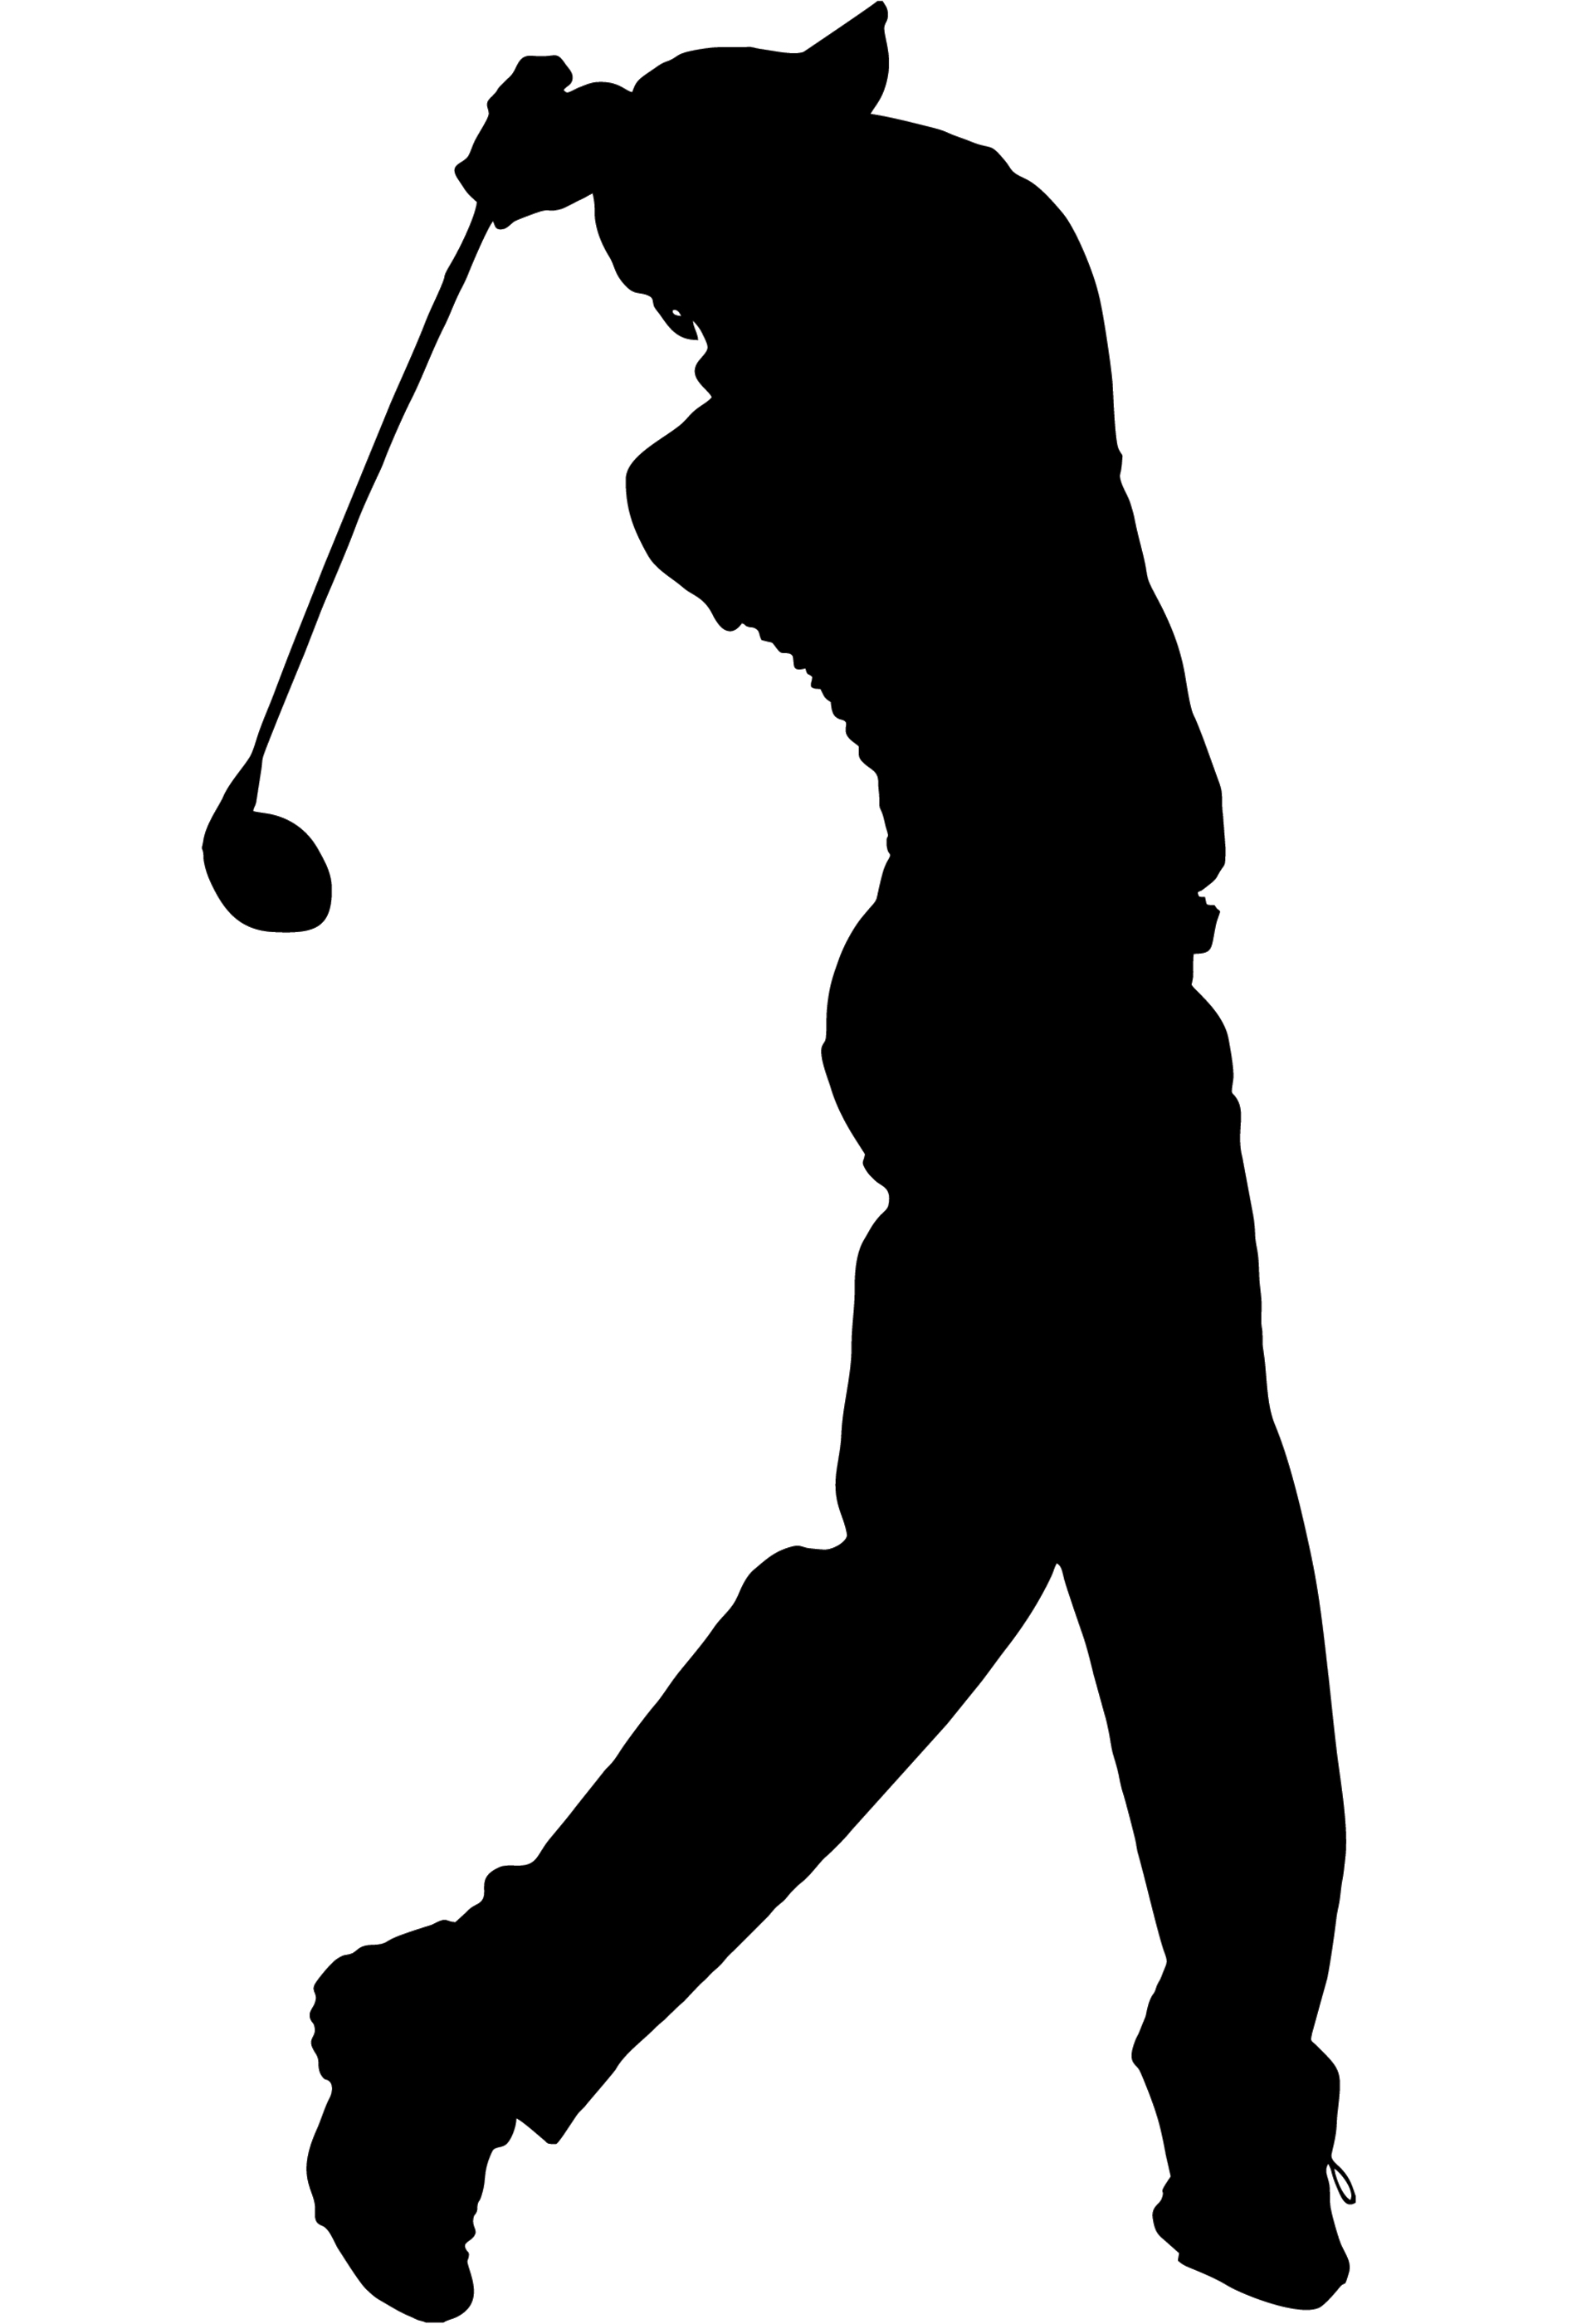 golf swing silhouette illustration of the reverse C” finish/follow-through that is part of the modern swing and not recommended for folks with Low Back Pain.